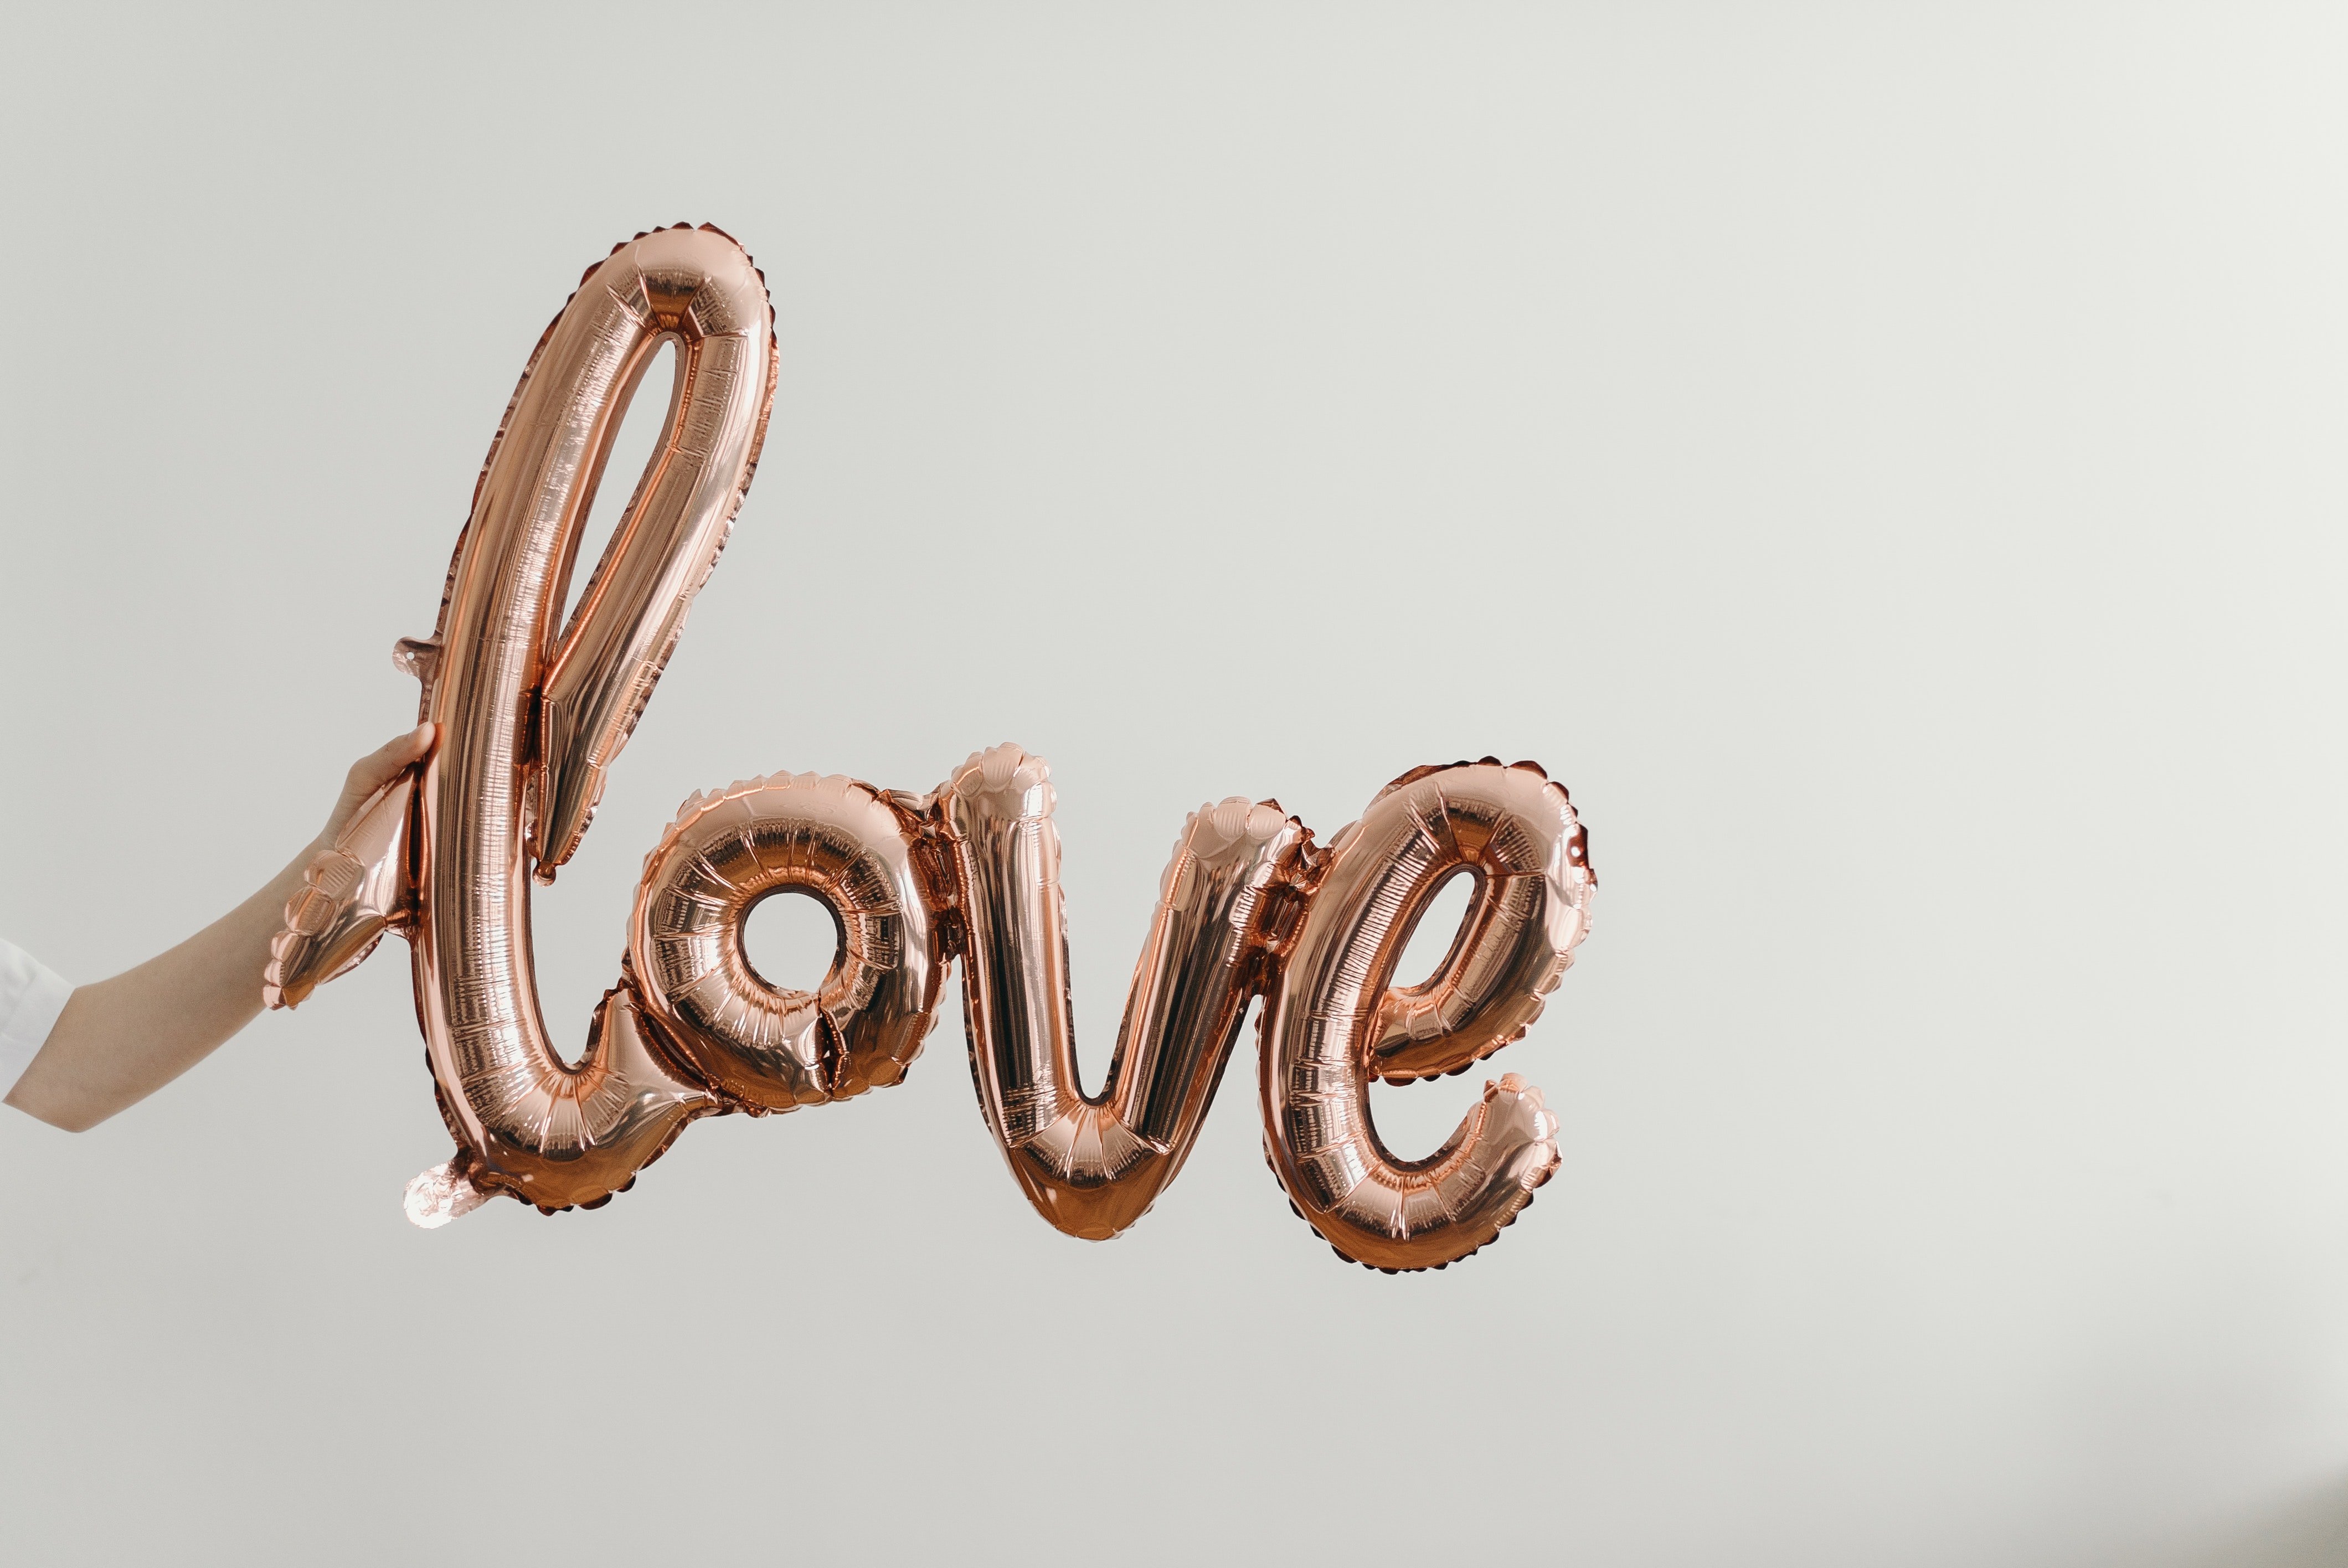 Pictured - A brown steel letter wall decor | Source: Pexels 